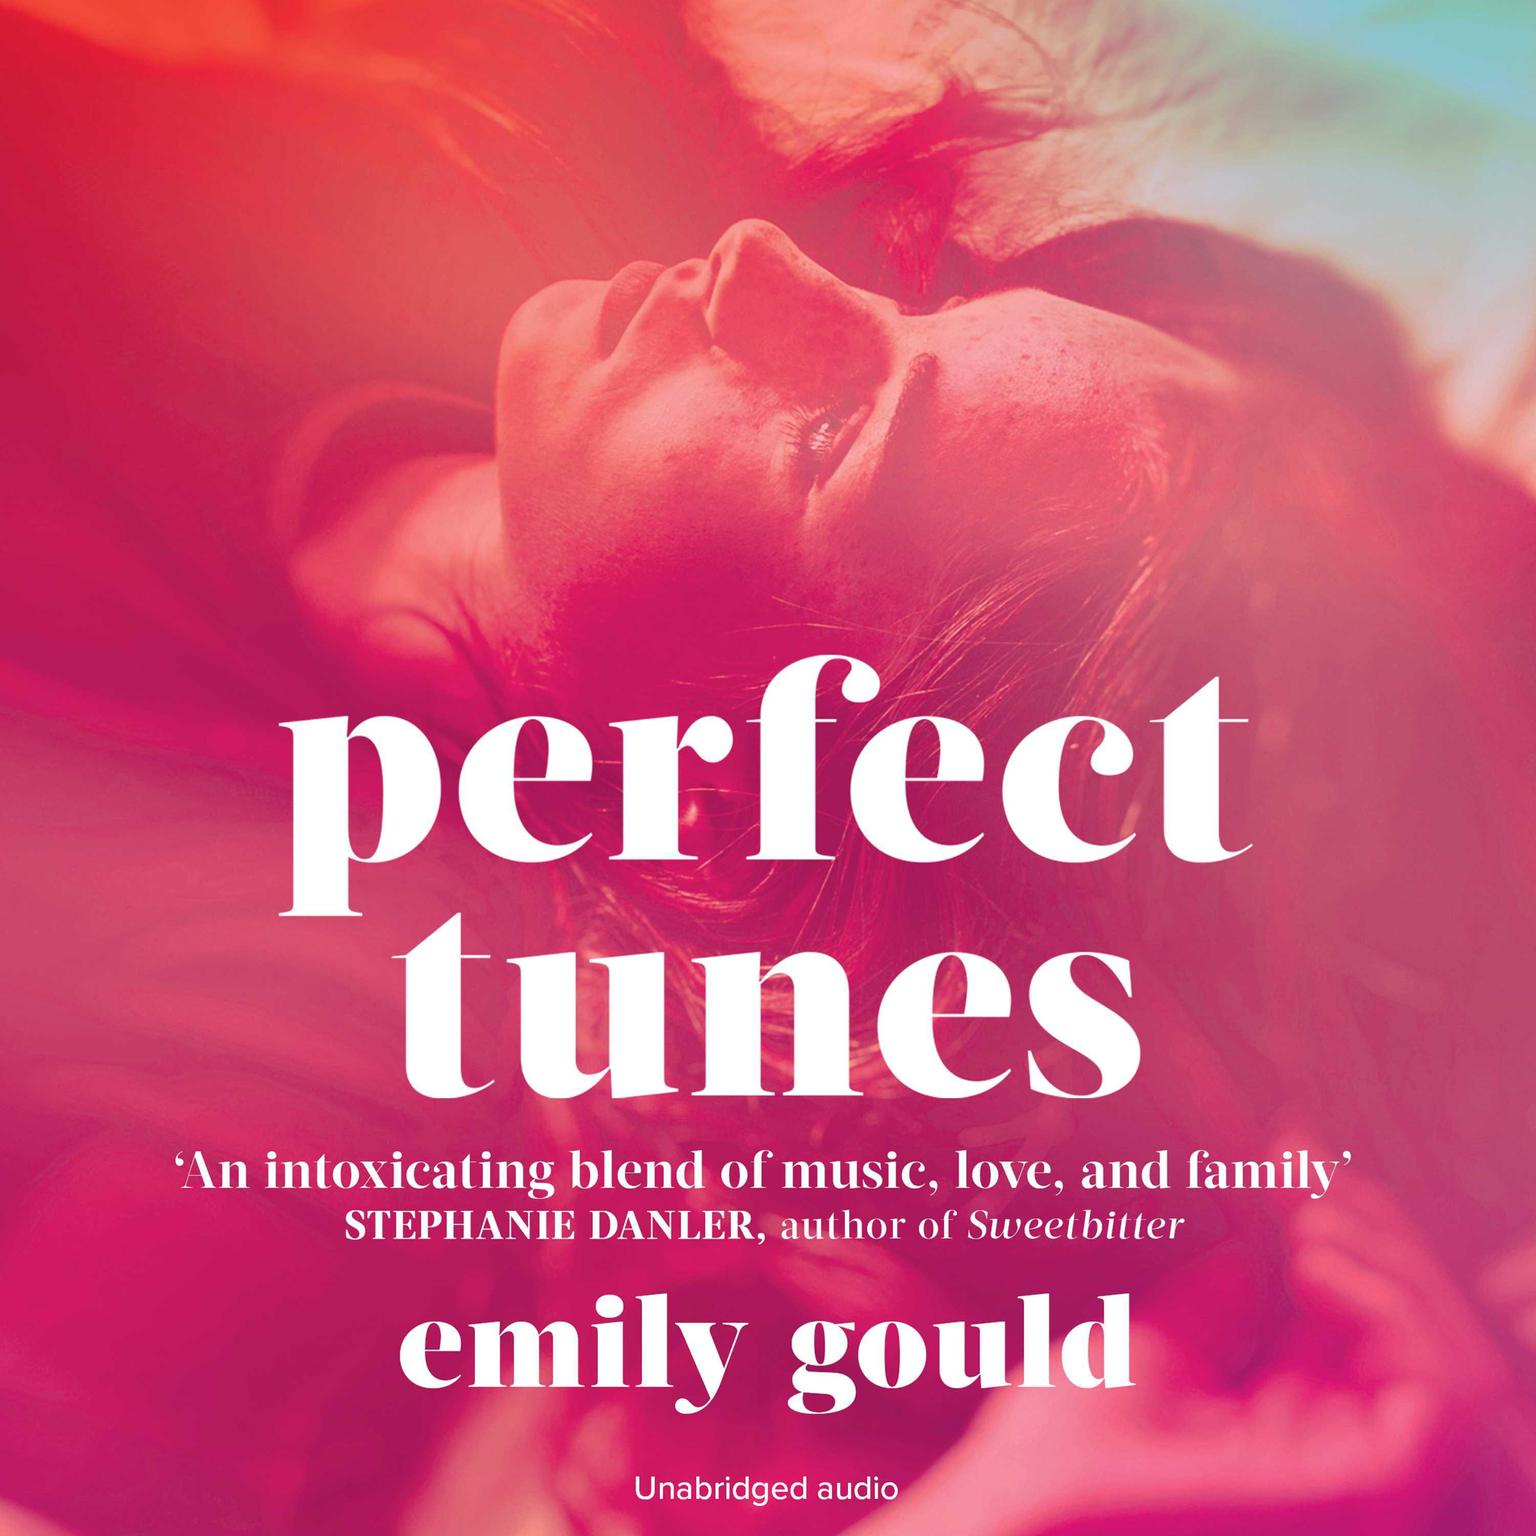 Perfect Tunes Audiobook, by Emily Gould